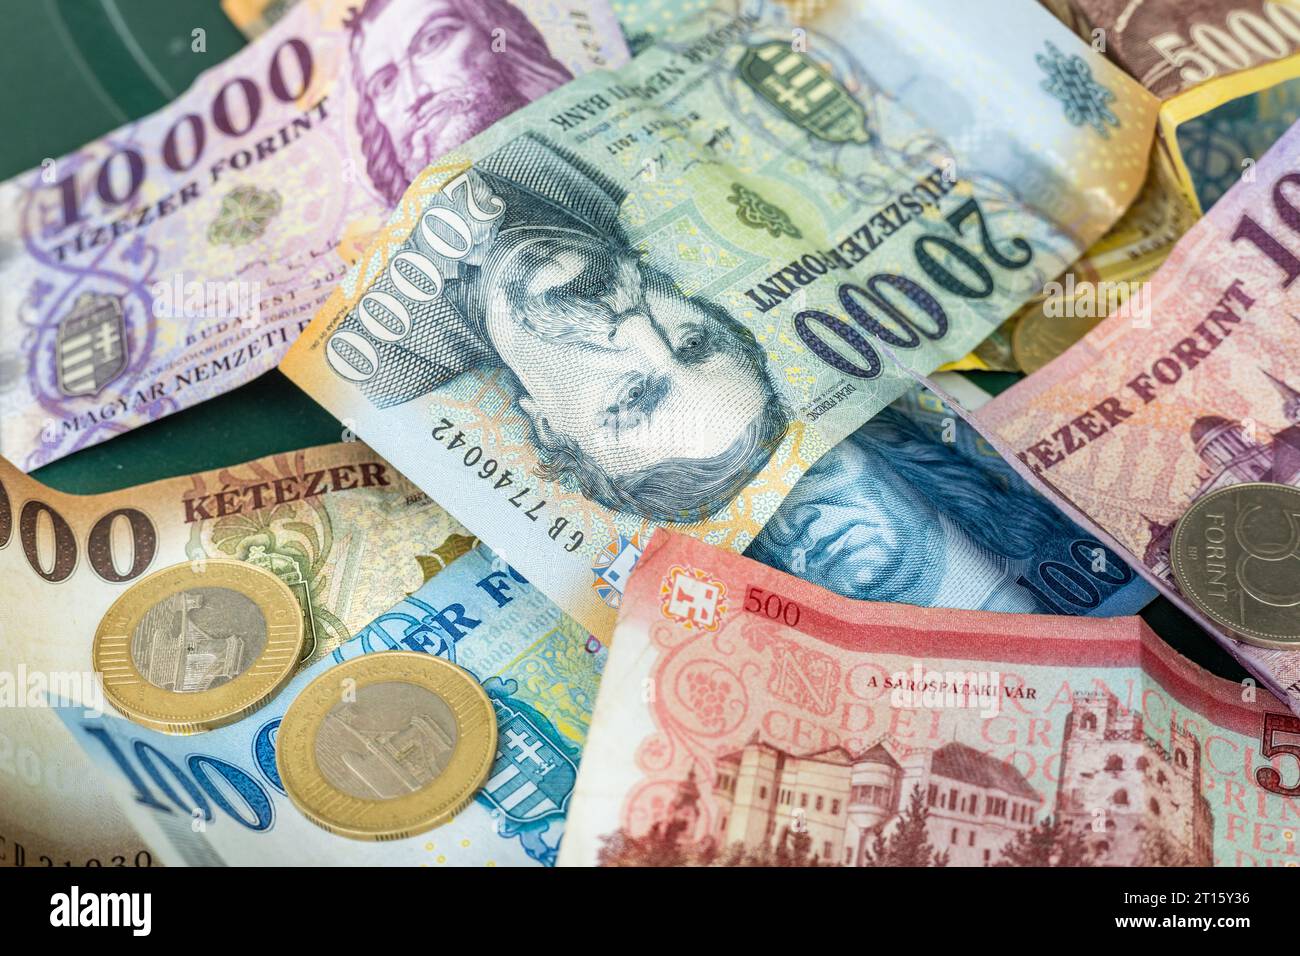 Hungarian forints, Hungary money, banknotes and coins, financial and economic concept Stock Photo